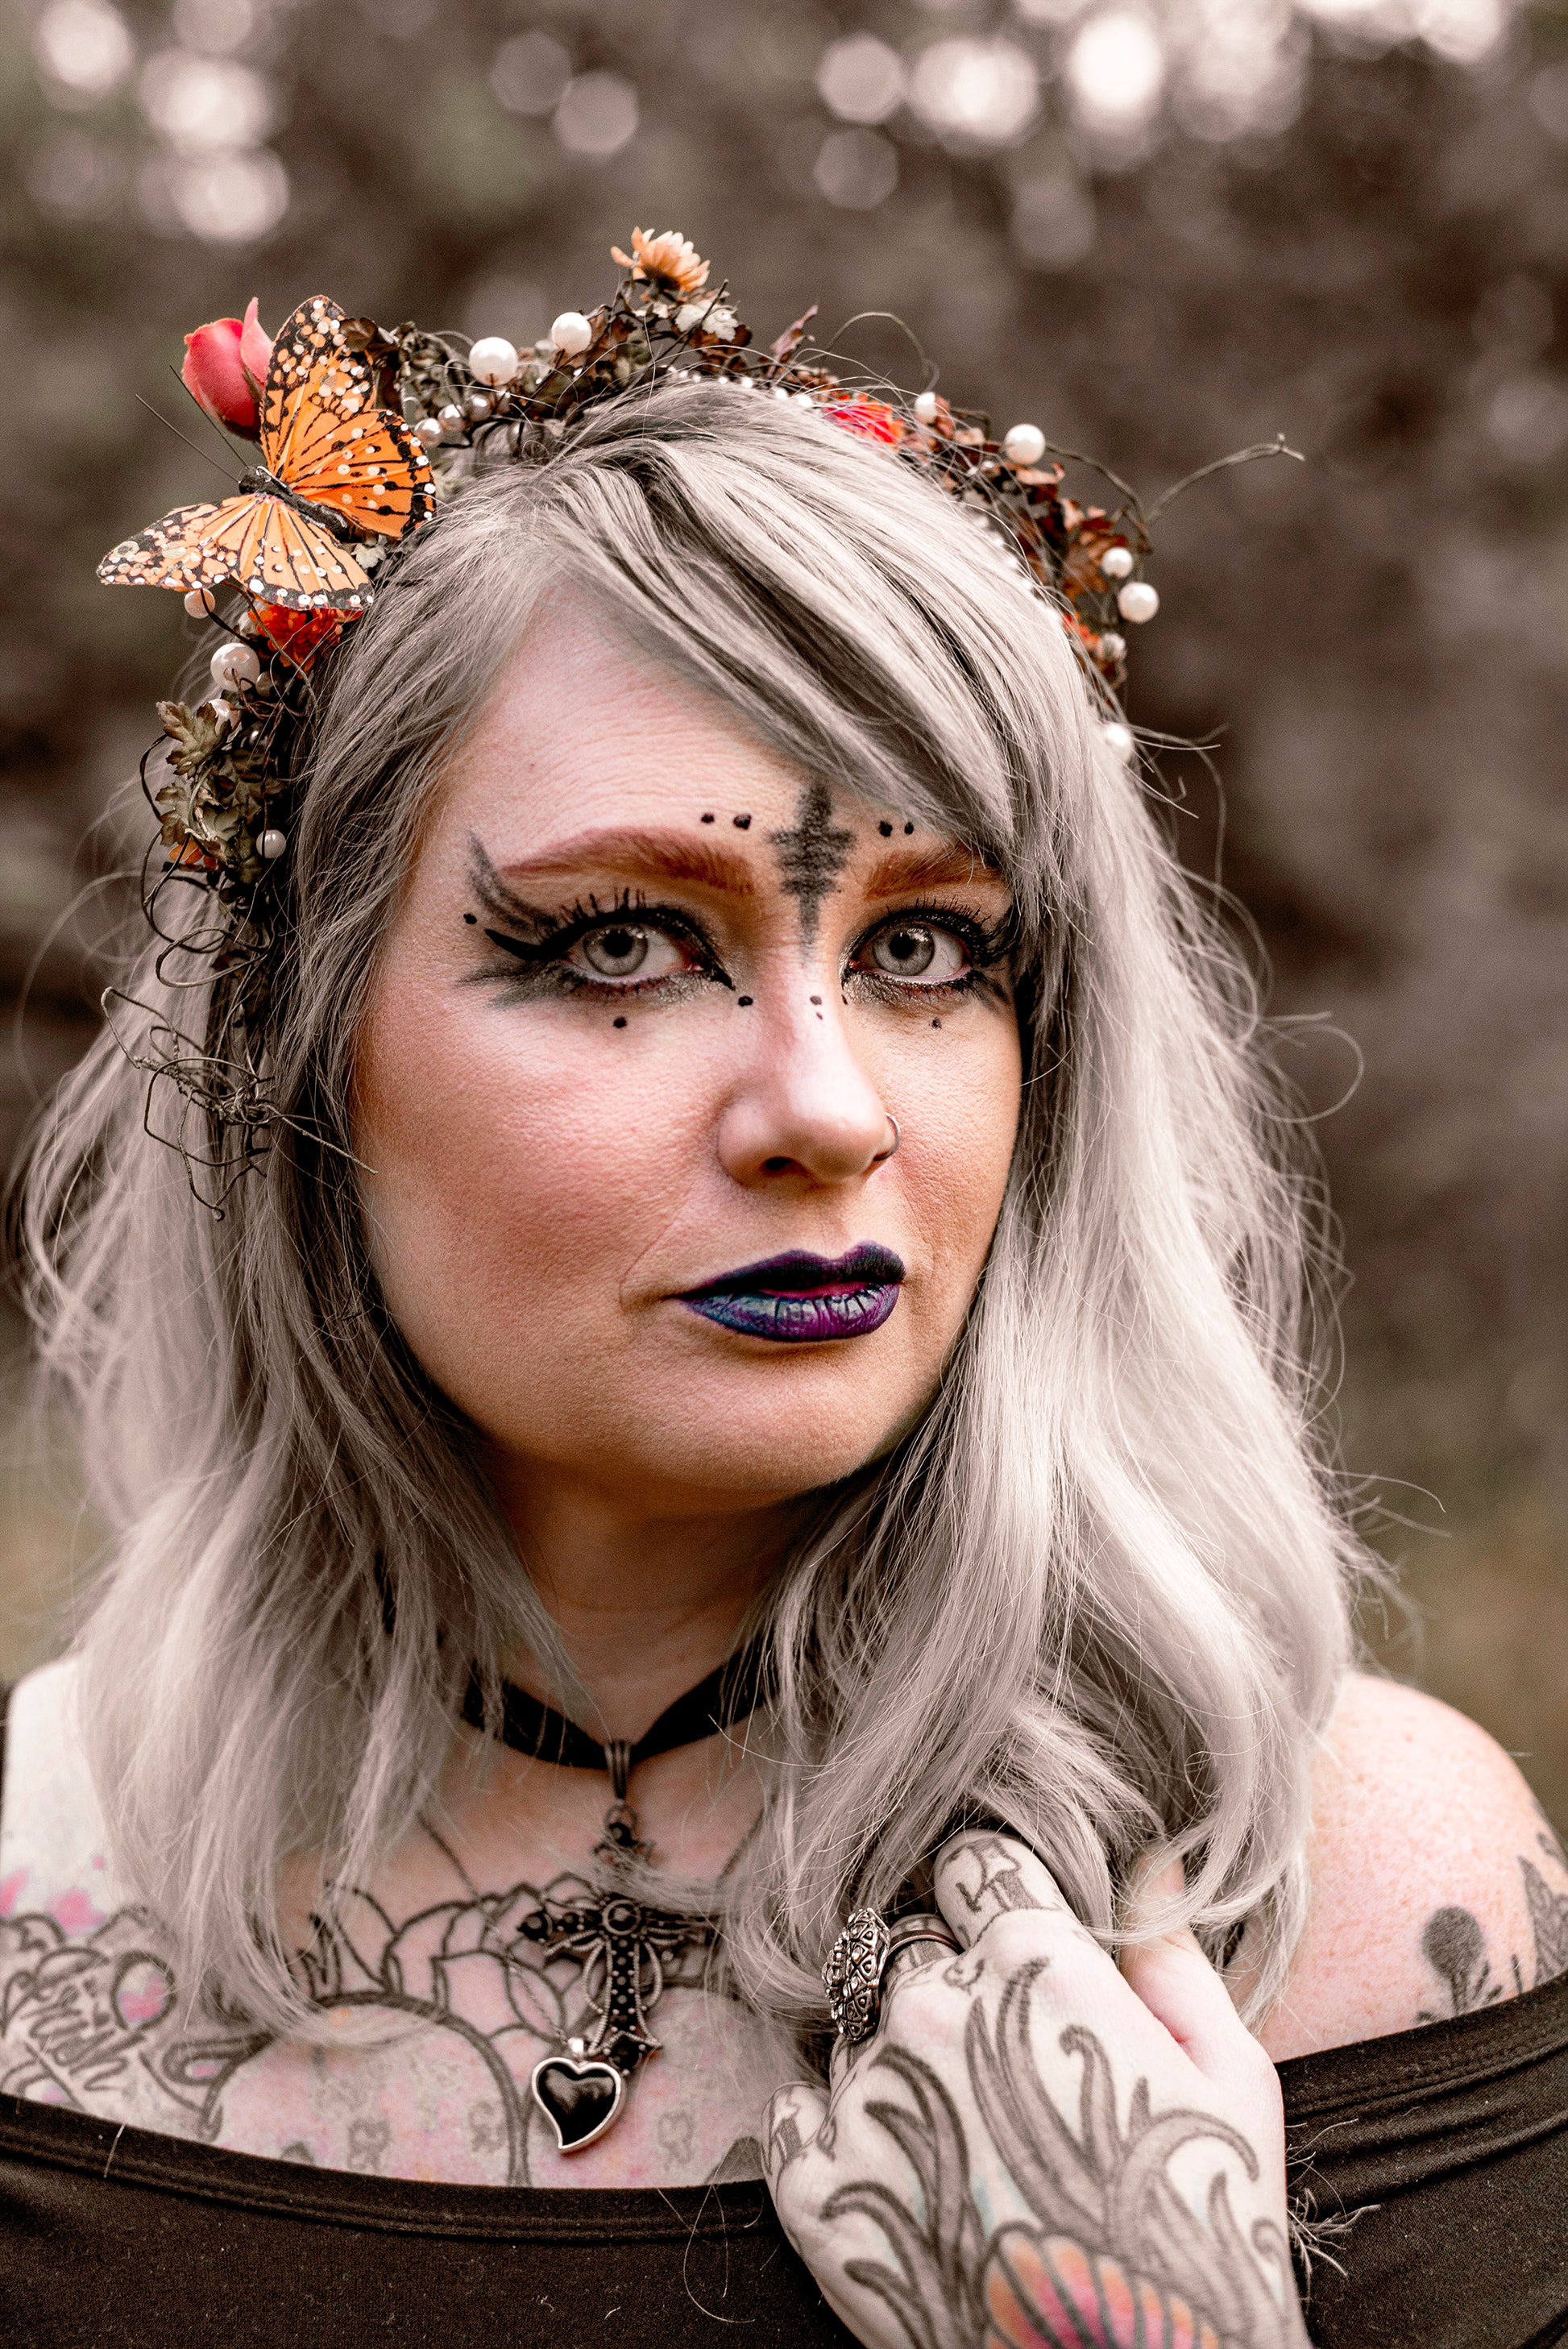 Fall Pearled Nature Flower Crown Modeled - desaturated colors